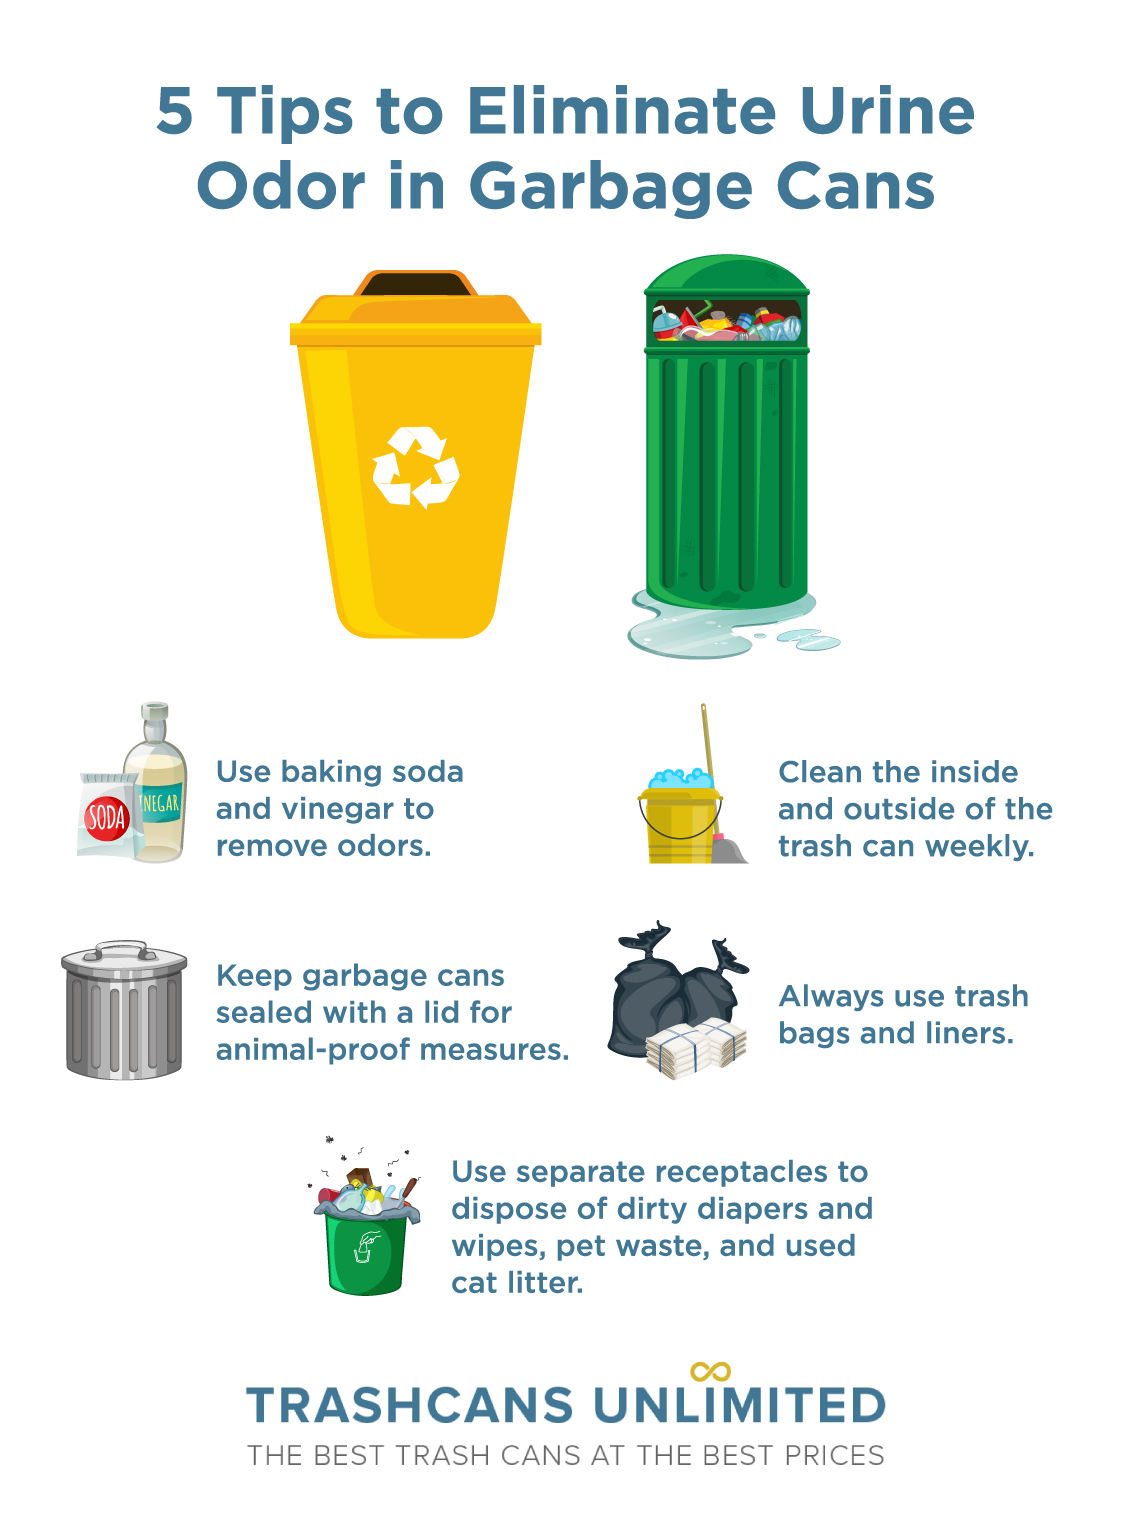 How To Clean Trash Can How to Get a Urine Smell Out of a Garbage Can - Trash Cans Unlimited